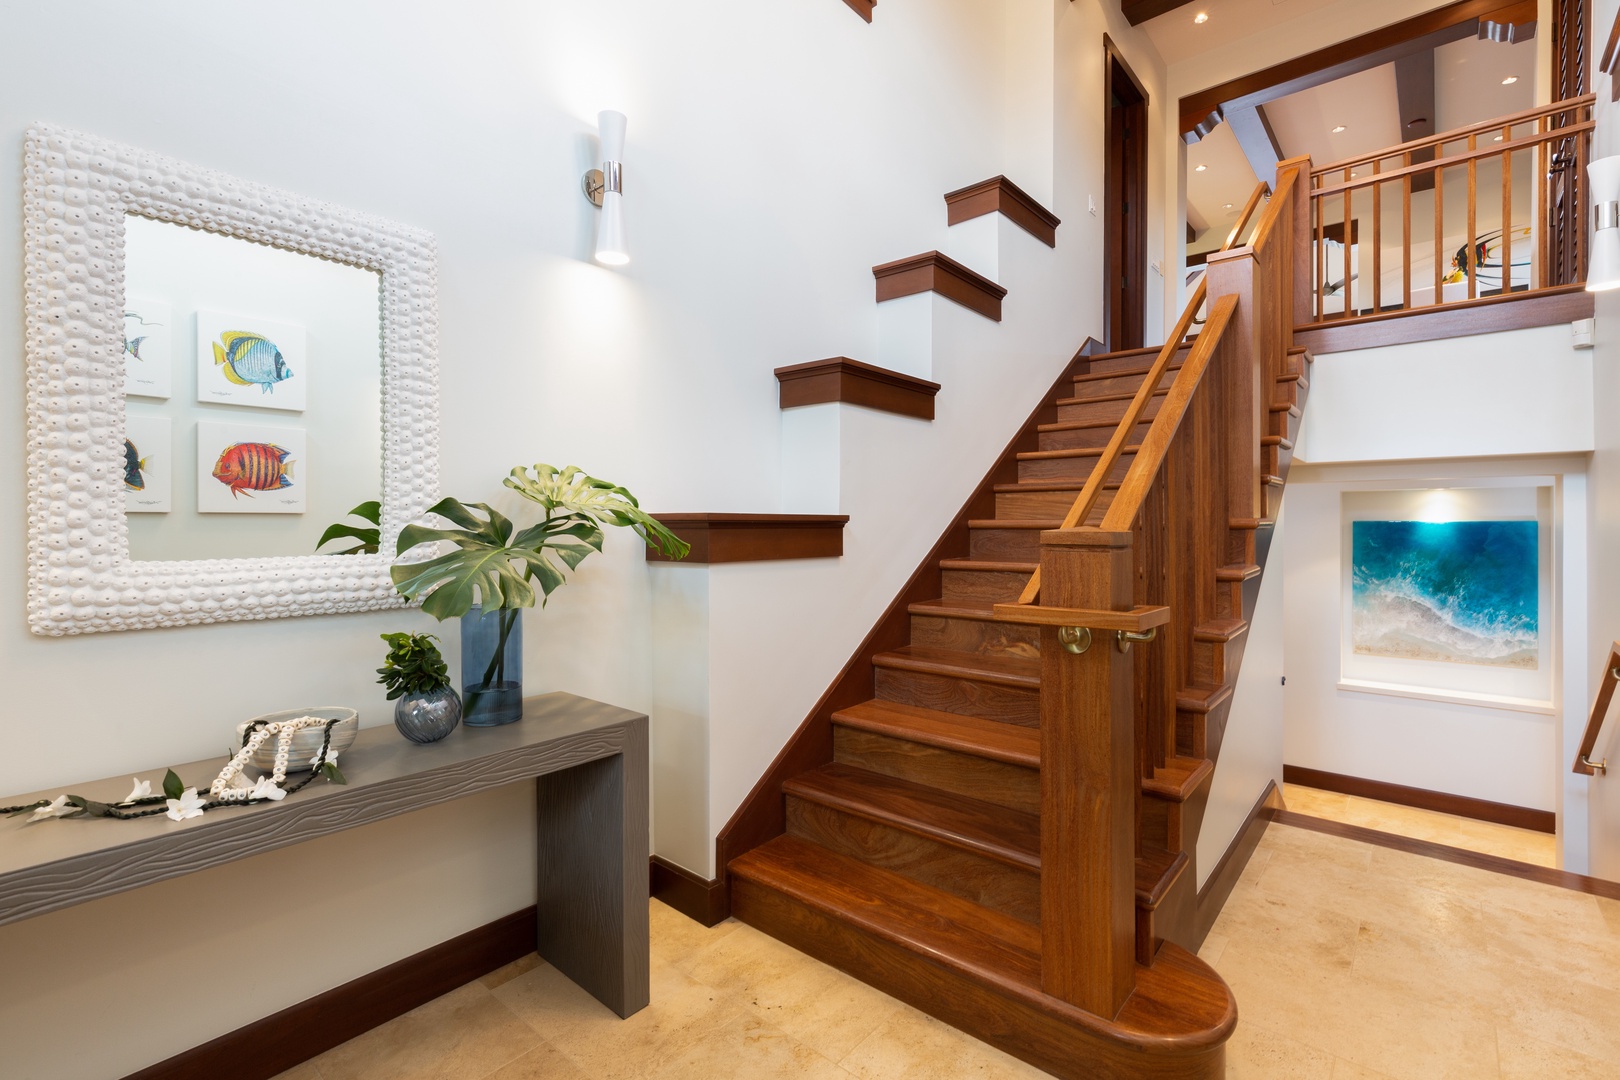 Kailua-Kona Vacation Rentals, 3BD Hali'ipua Villa (120) at Four Seasons Resort at Hualalai - The tasteful foyer invites you to step foot inside this gorgeous home. Great room and kitchen are upstairs, bedrooms are downstairs